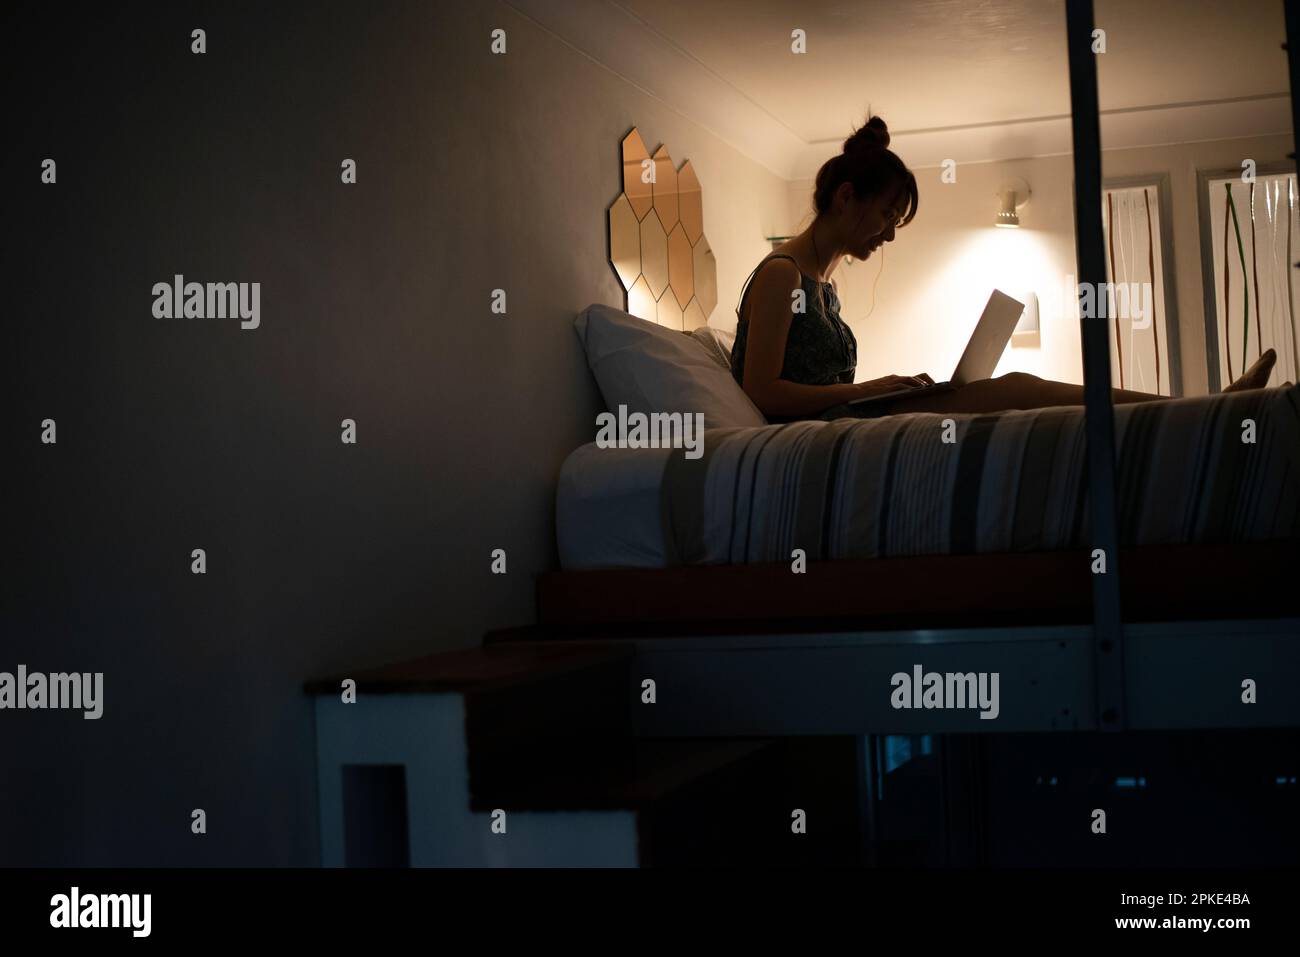 Woman using laptop on bed in loft Stock Photo